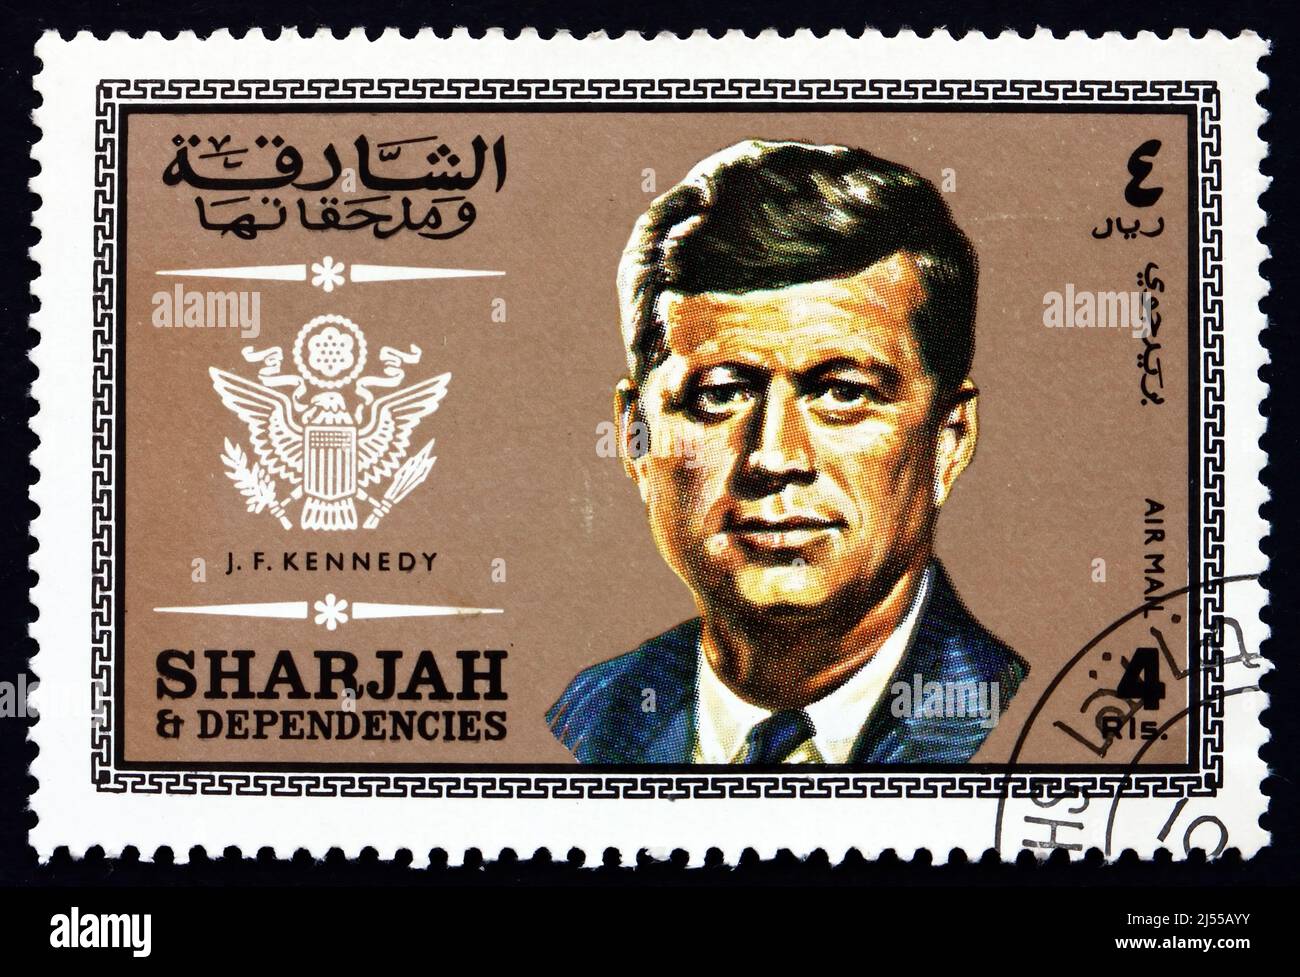 SHARJAH - CIRCA 1969: a stamp printed in the Sharjah UAE shows John Fitzgerald Kennedy, American Politician, 35th President of the United States from Stock Photo